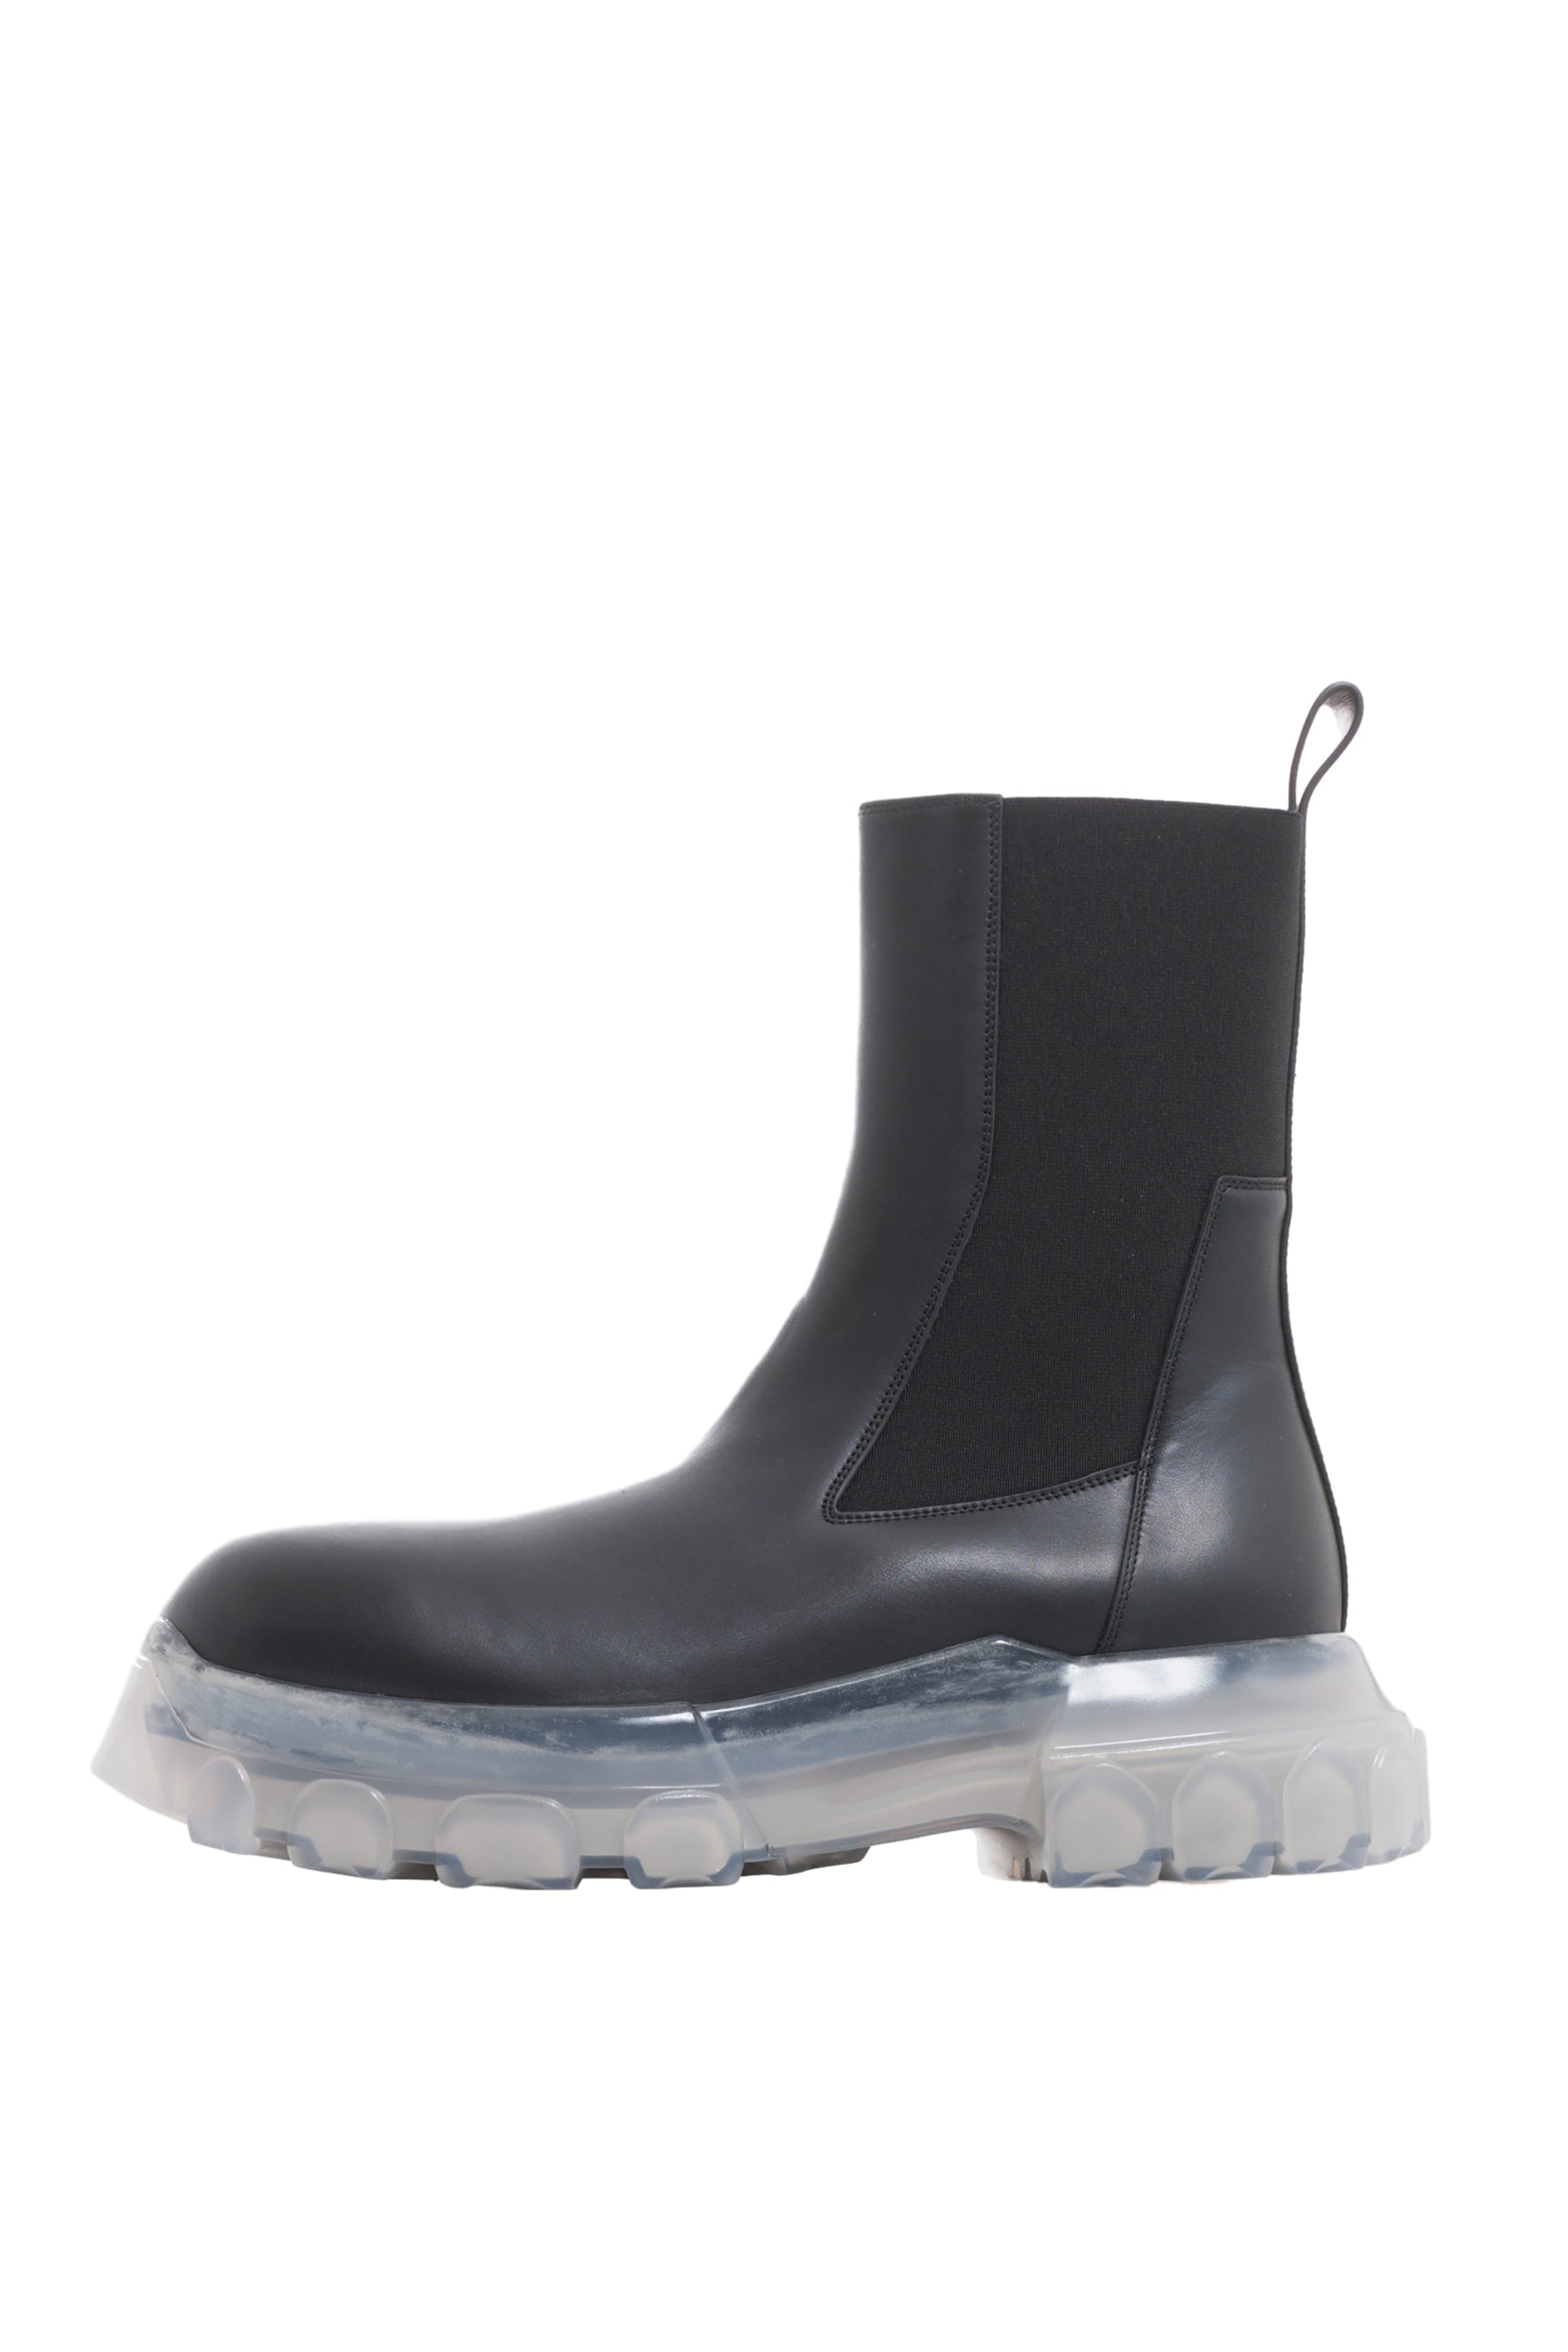 Rick Owens SS23 BEATLE BOZO TRACTOR / BLACK/CLEAR